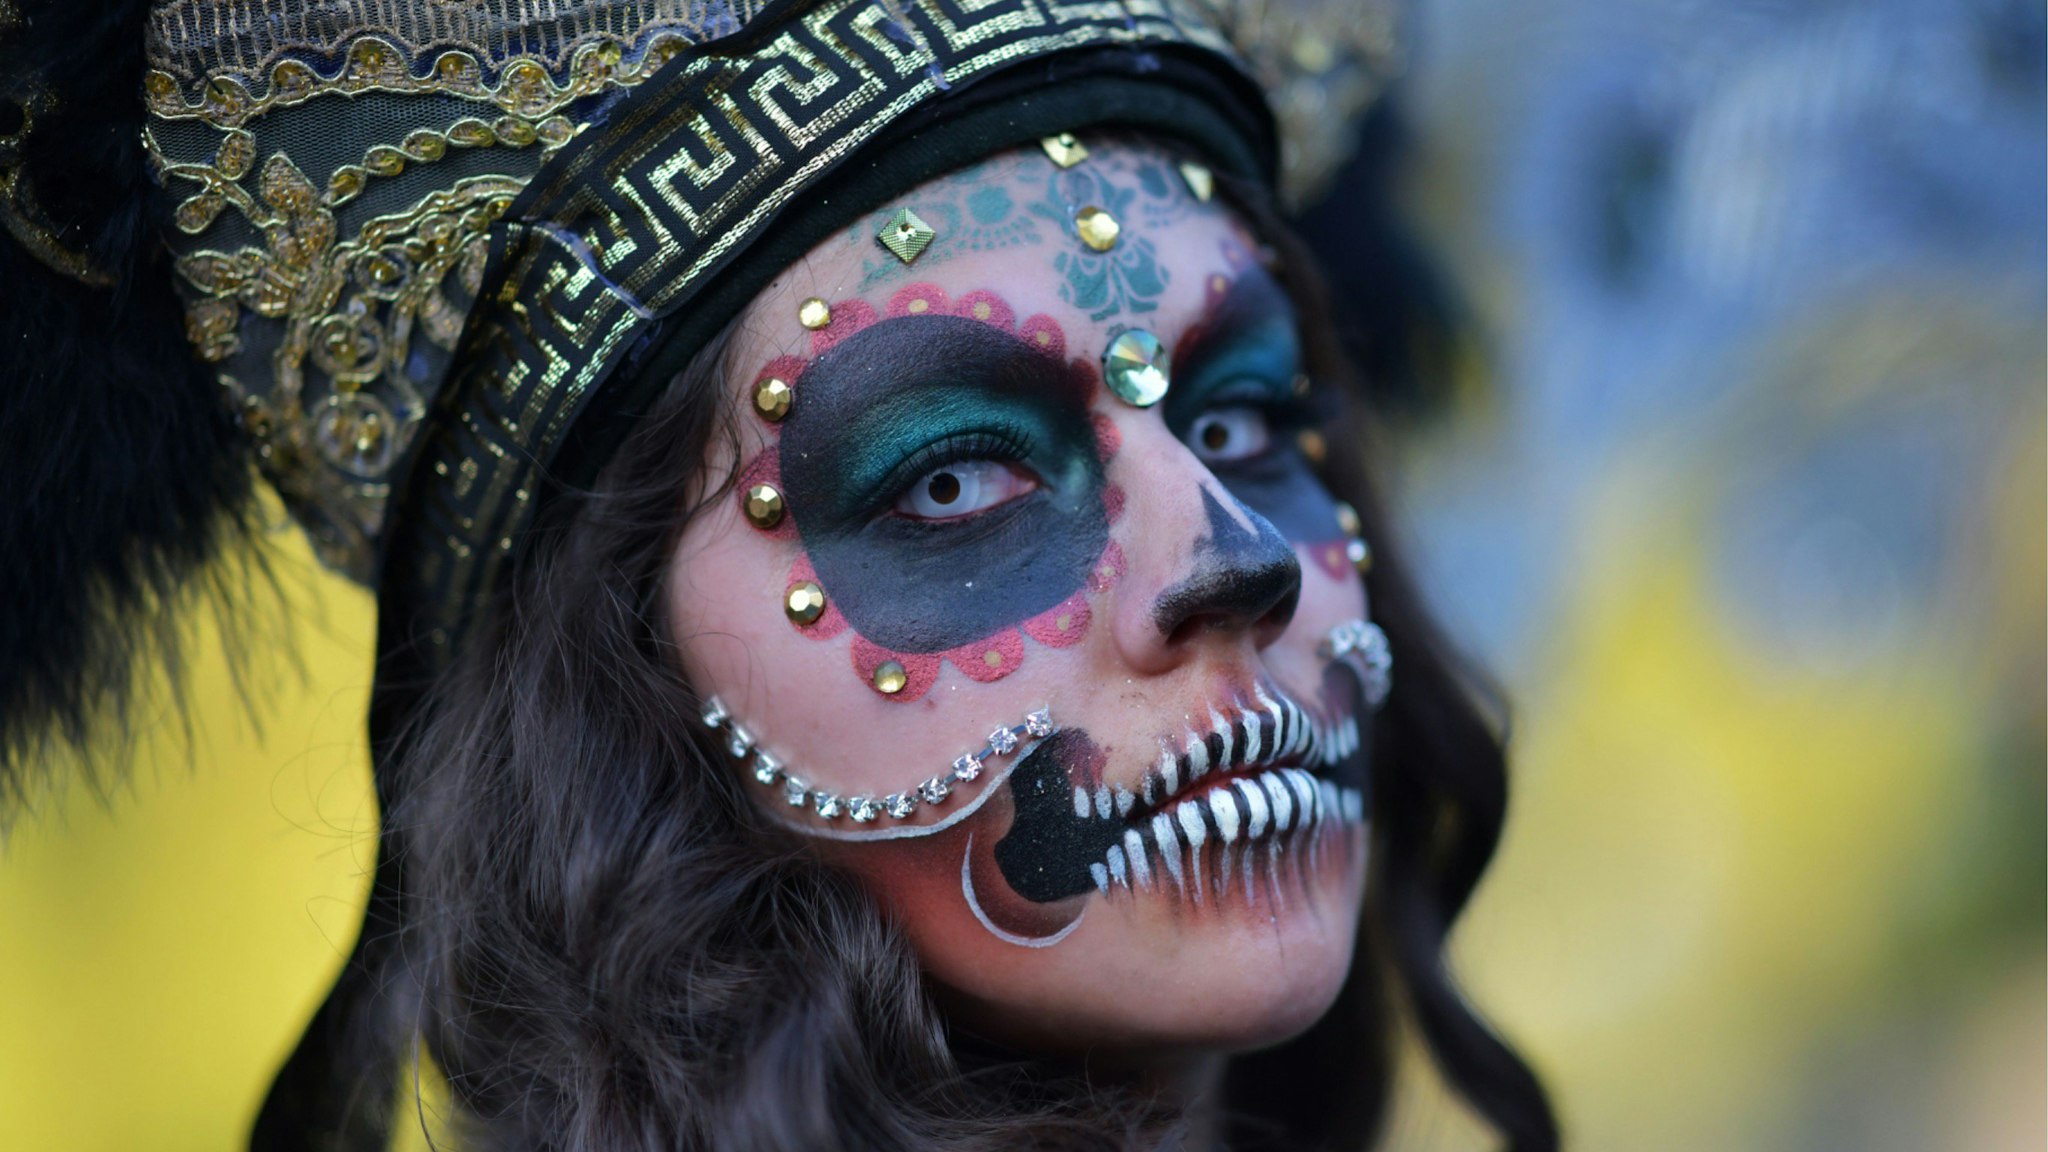 A woman in costume poses as she attends Hollywood Forever Cemetery's 19th annual Dia De Los Muertos event on October 27, 2018.